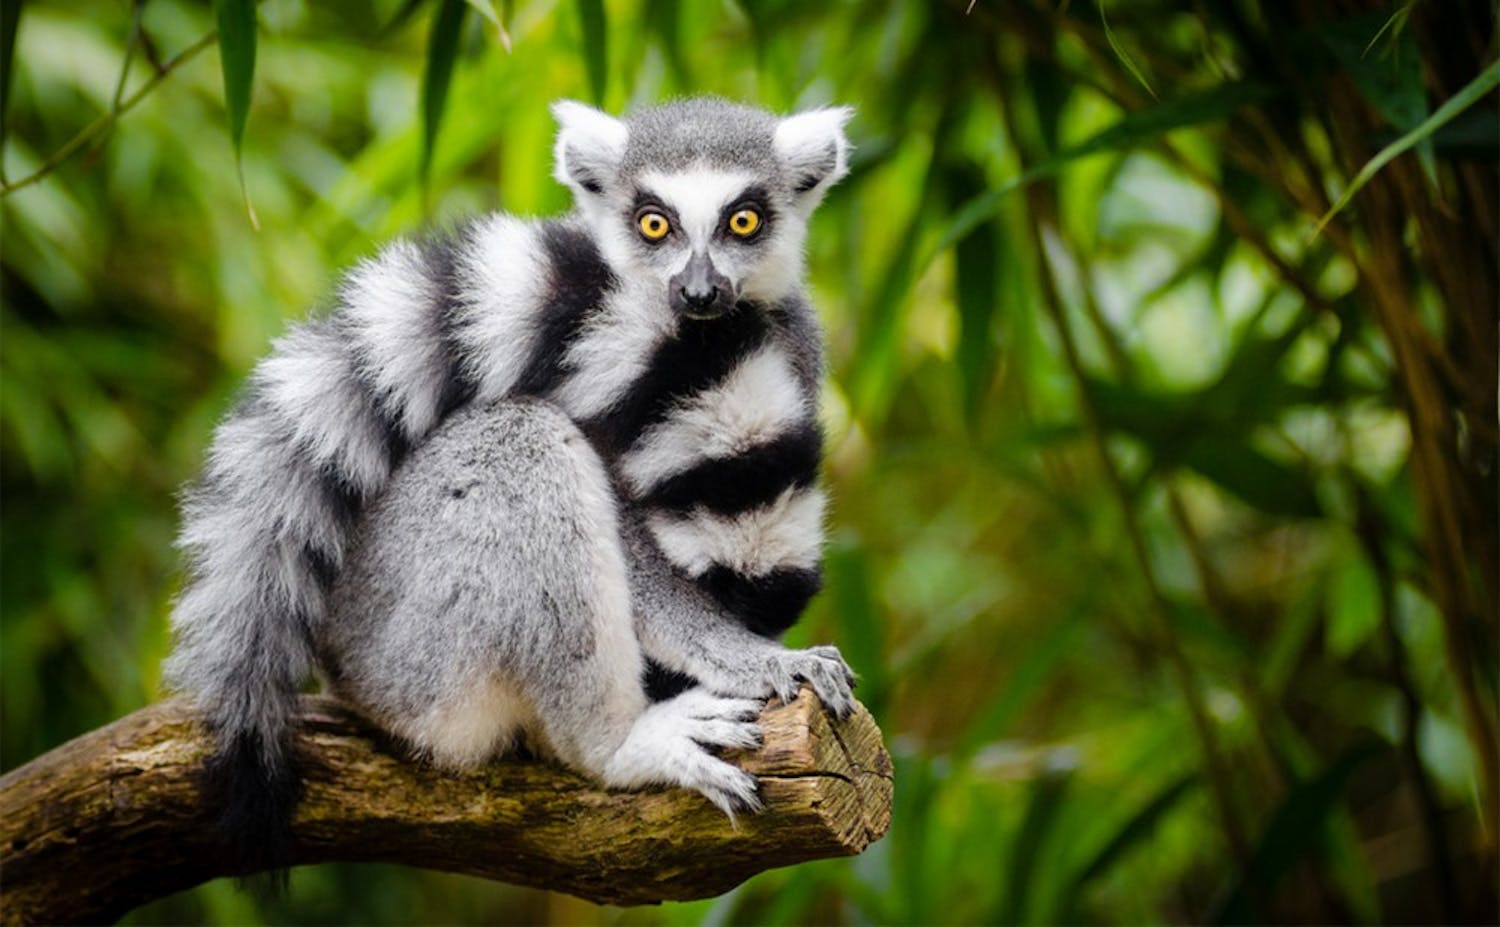 Habitat loss and hunting have caused the ring-tailed lemur population to decline.